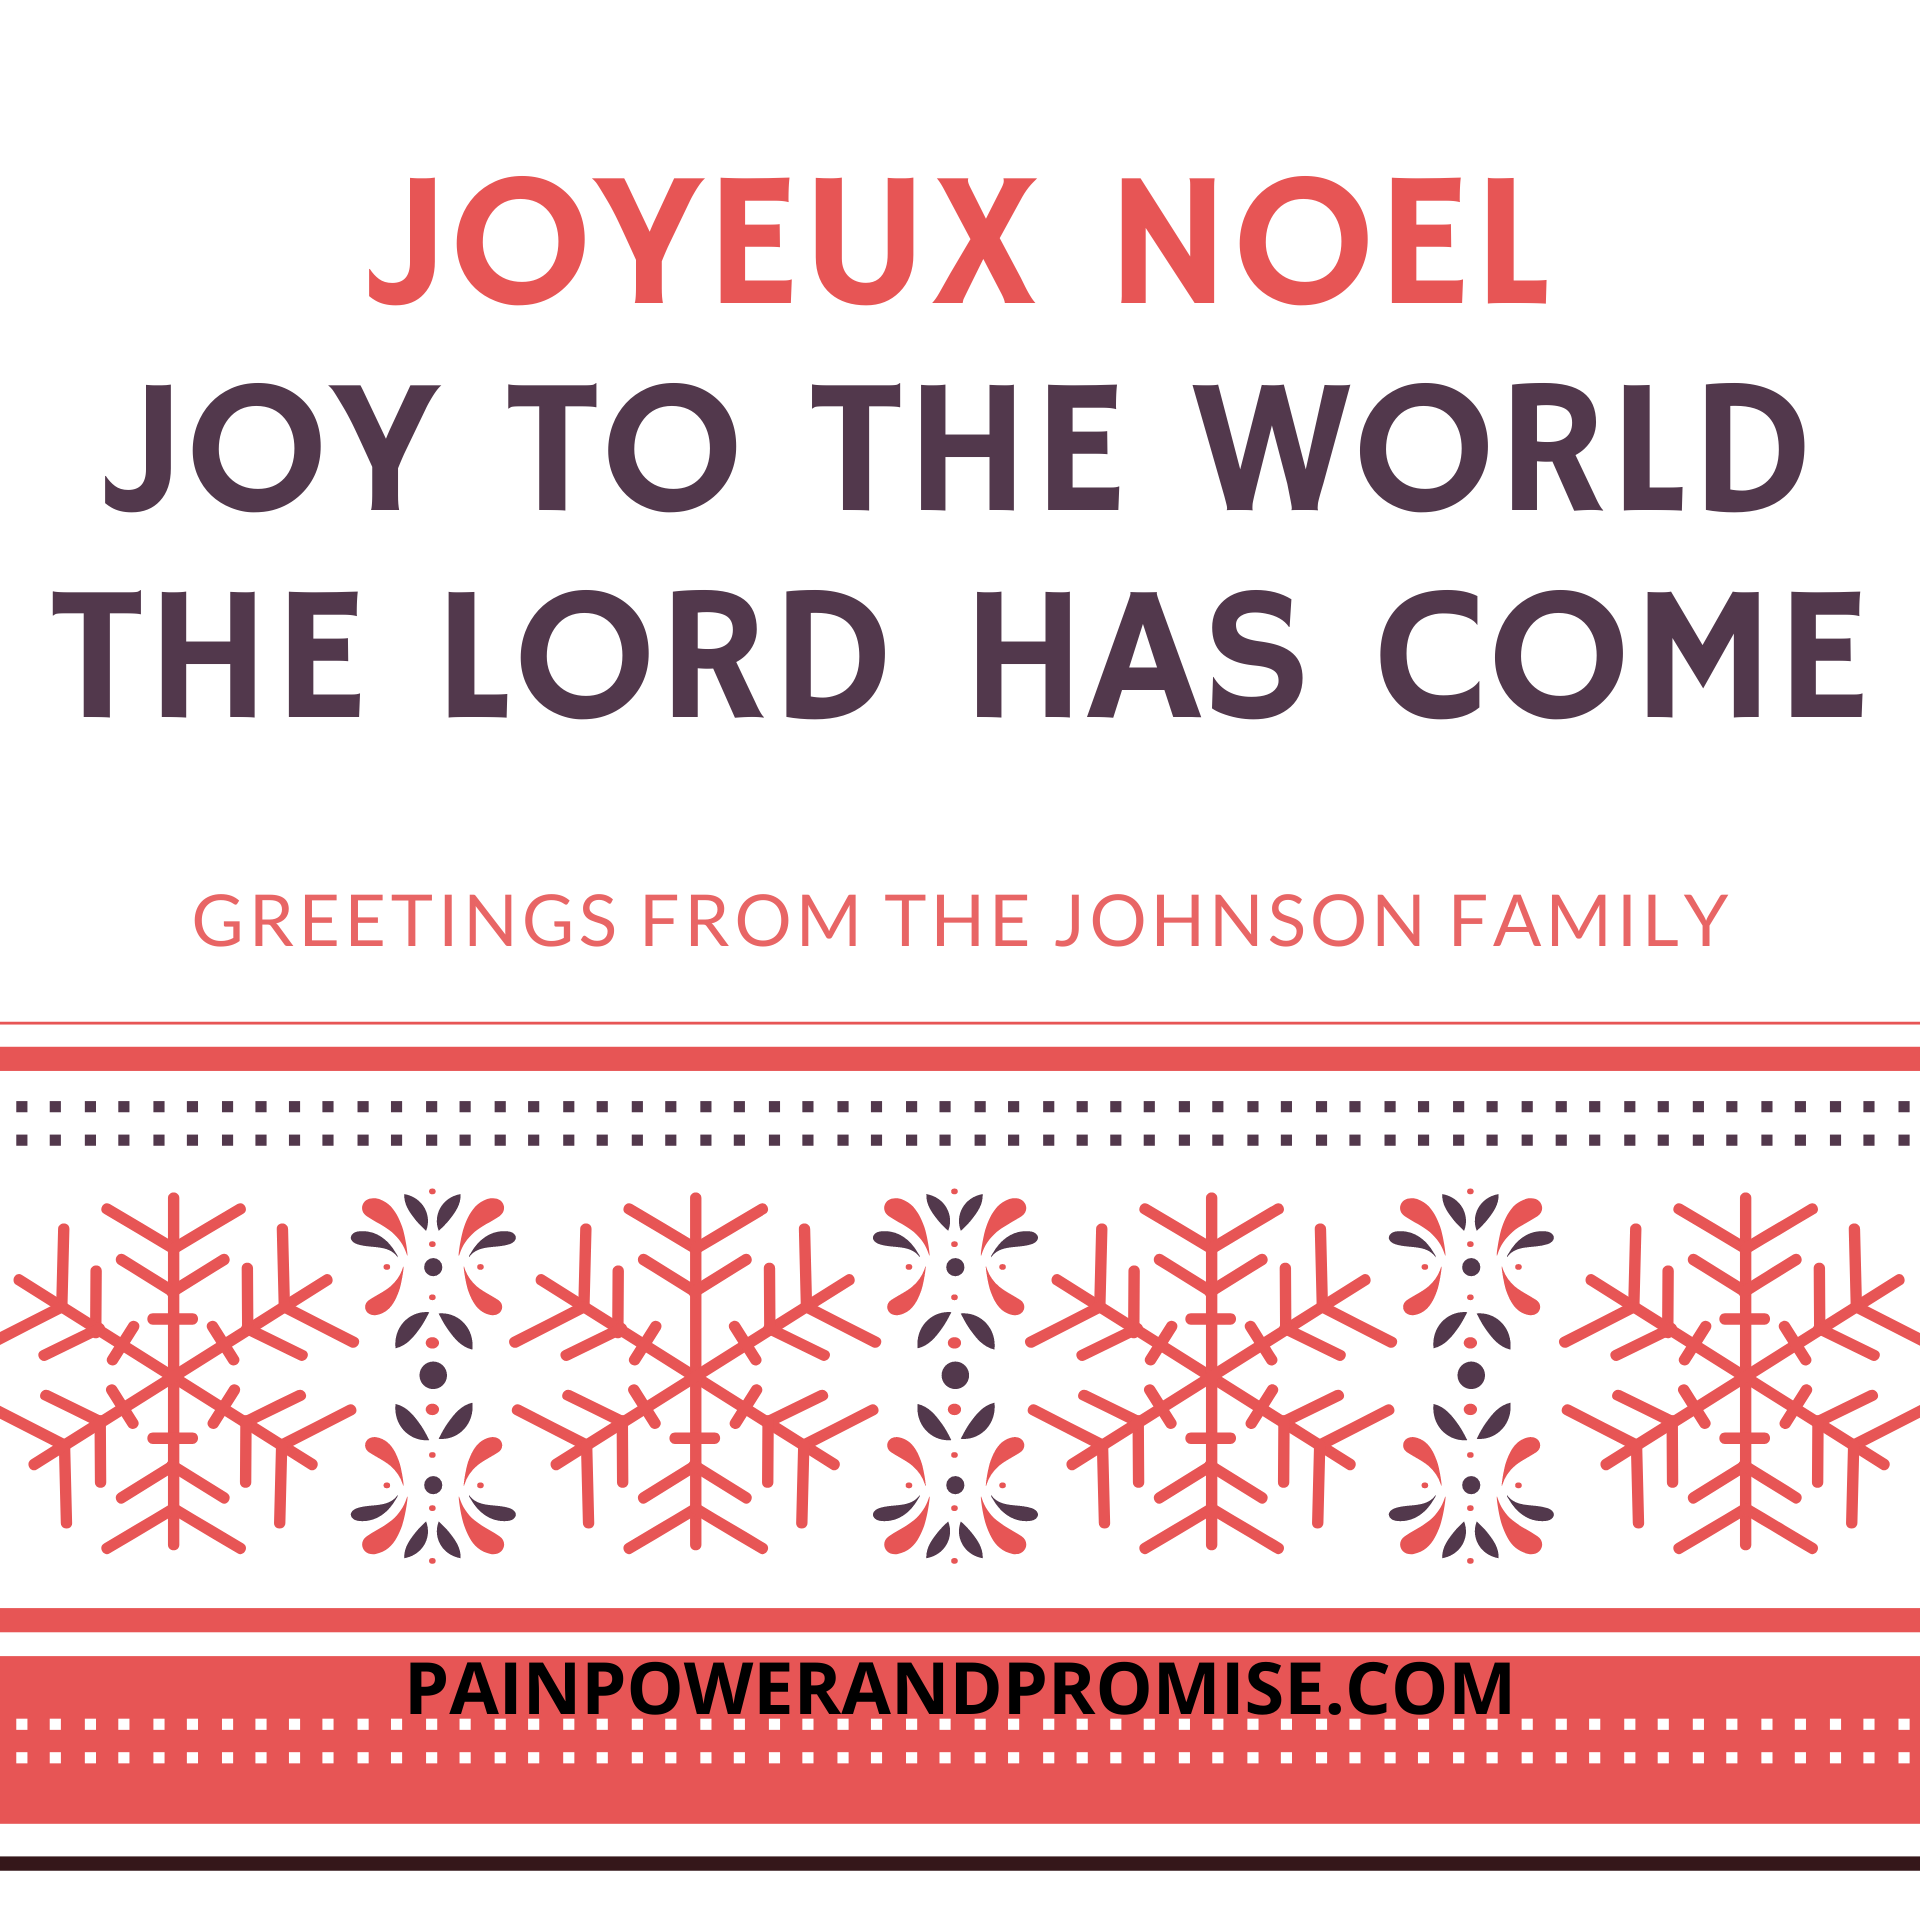 JOY to the World the LORD has come!